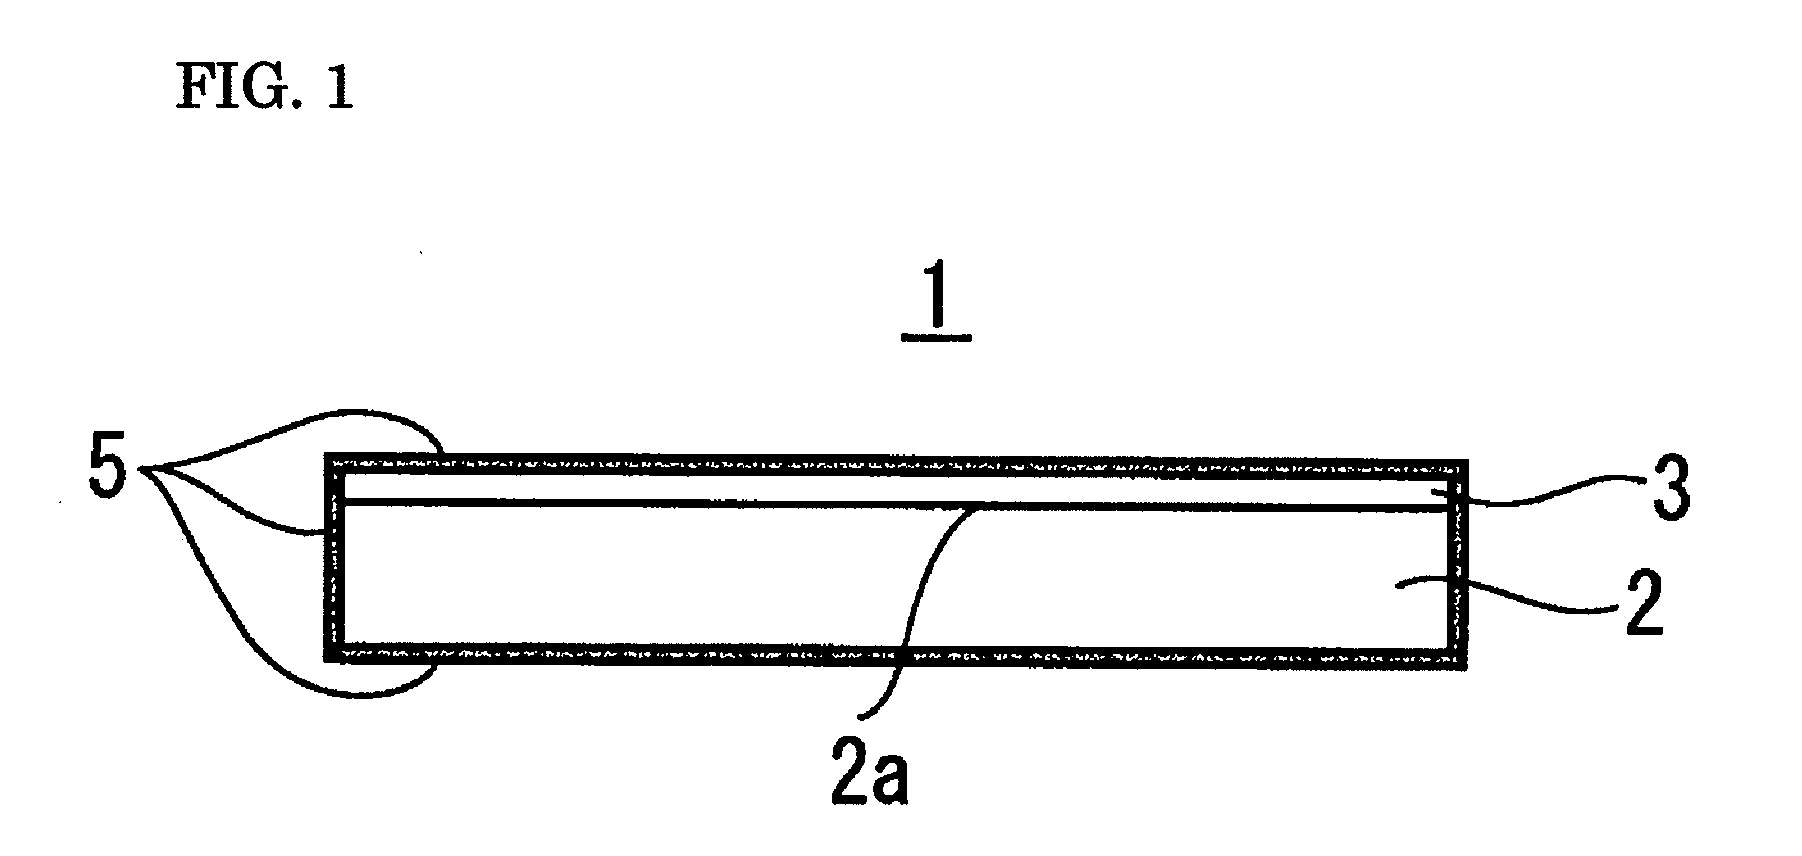 Porous multilayer filter and method for producing same